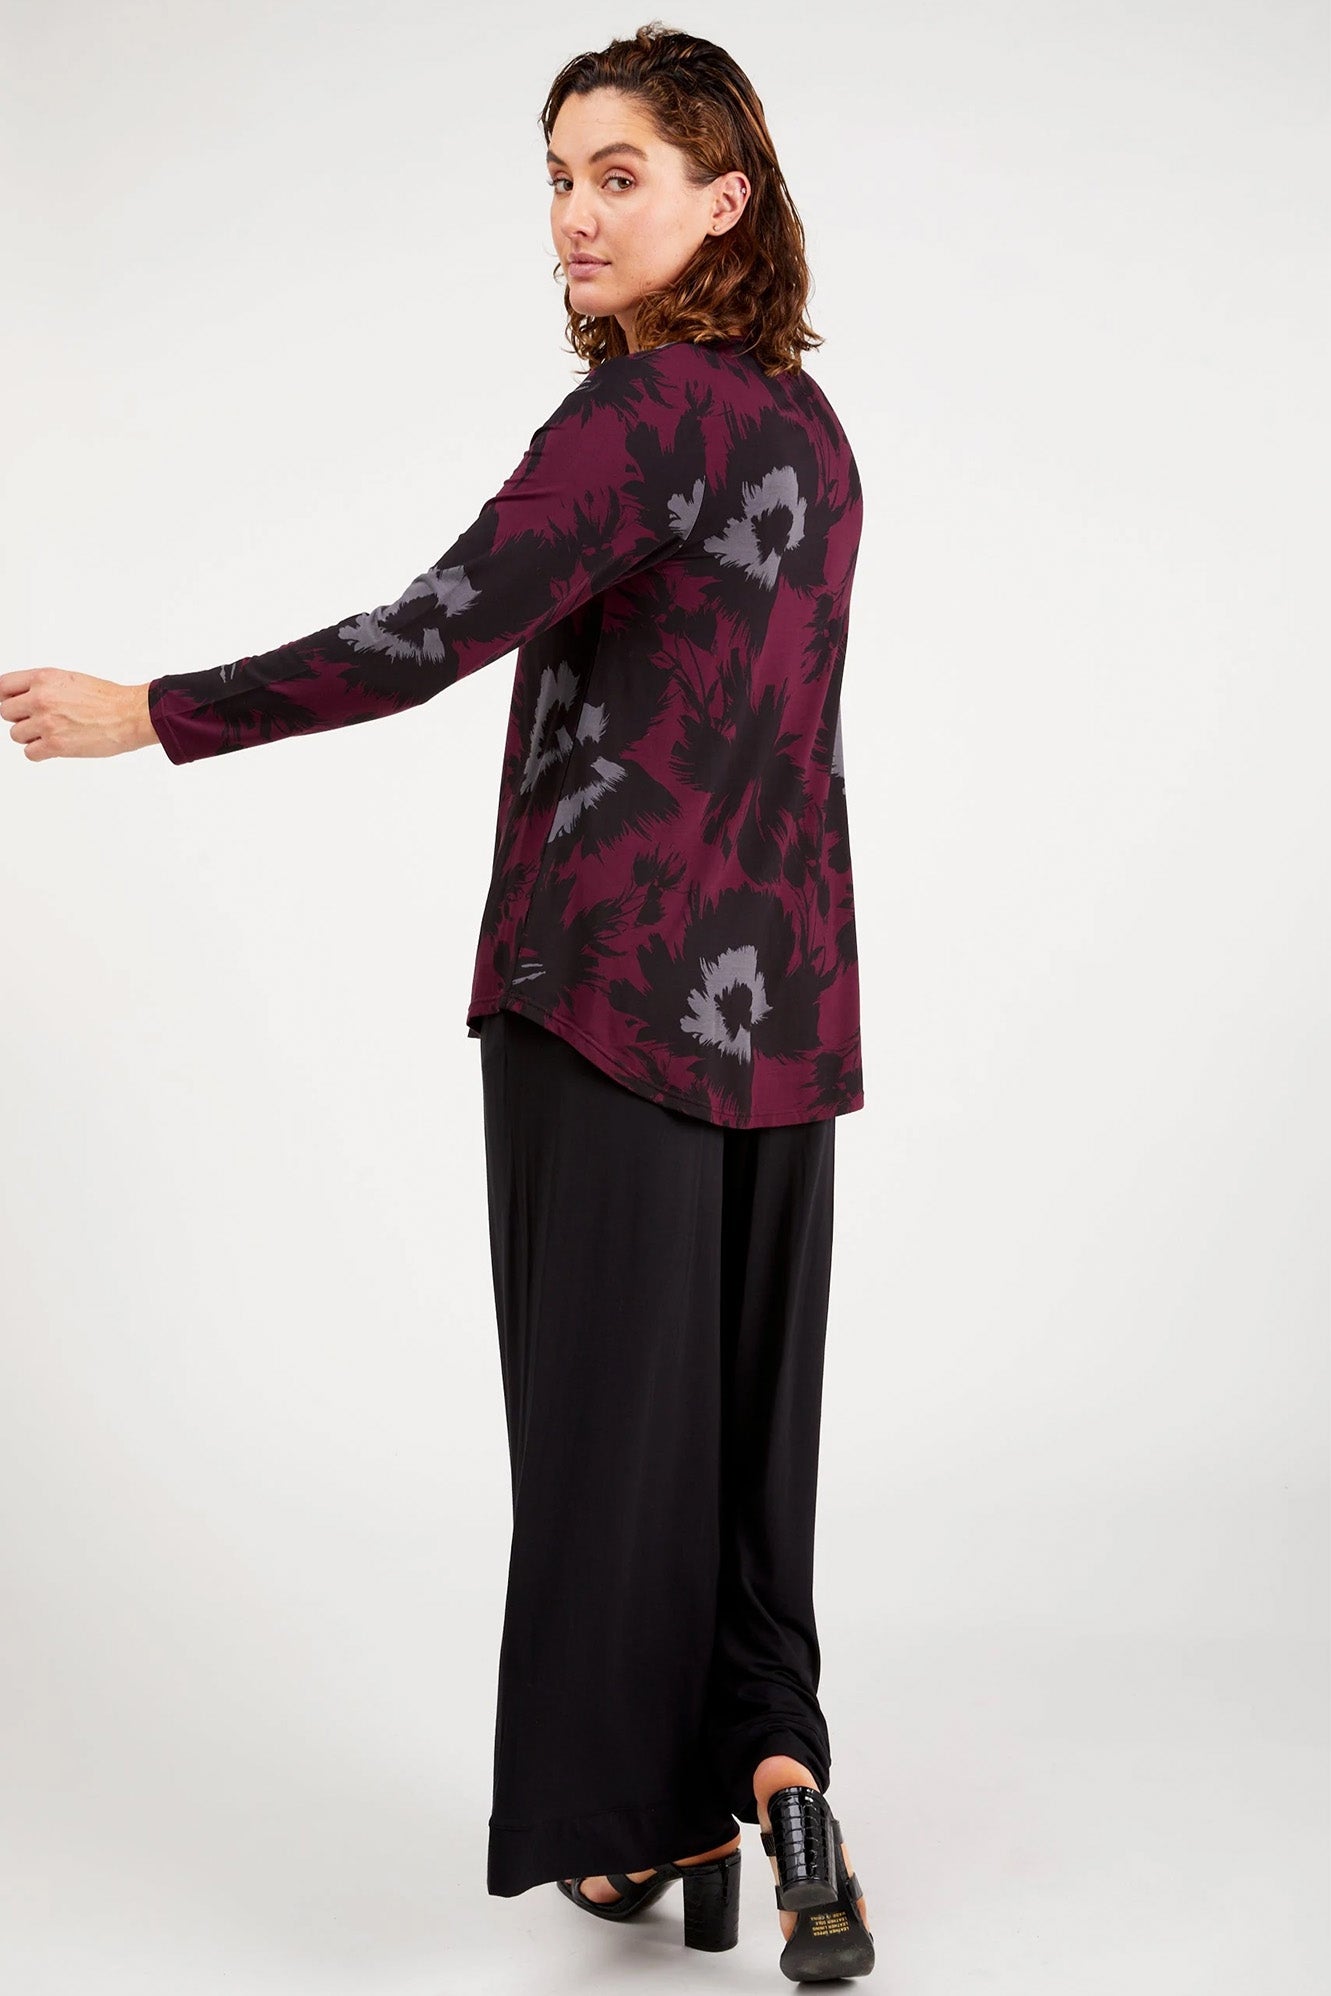 Young woman wearing Tani 79767 Cara Long Sleeve in Bloom Print back view